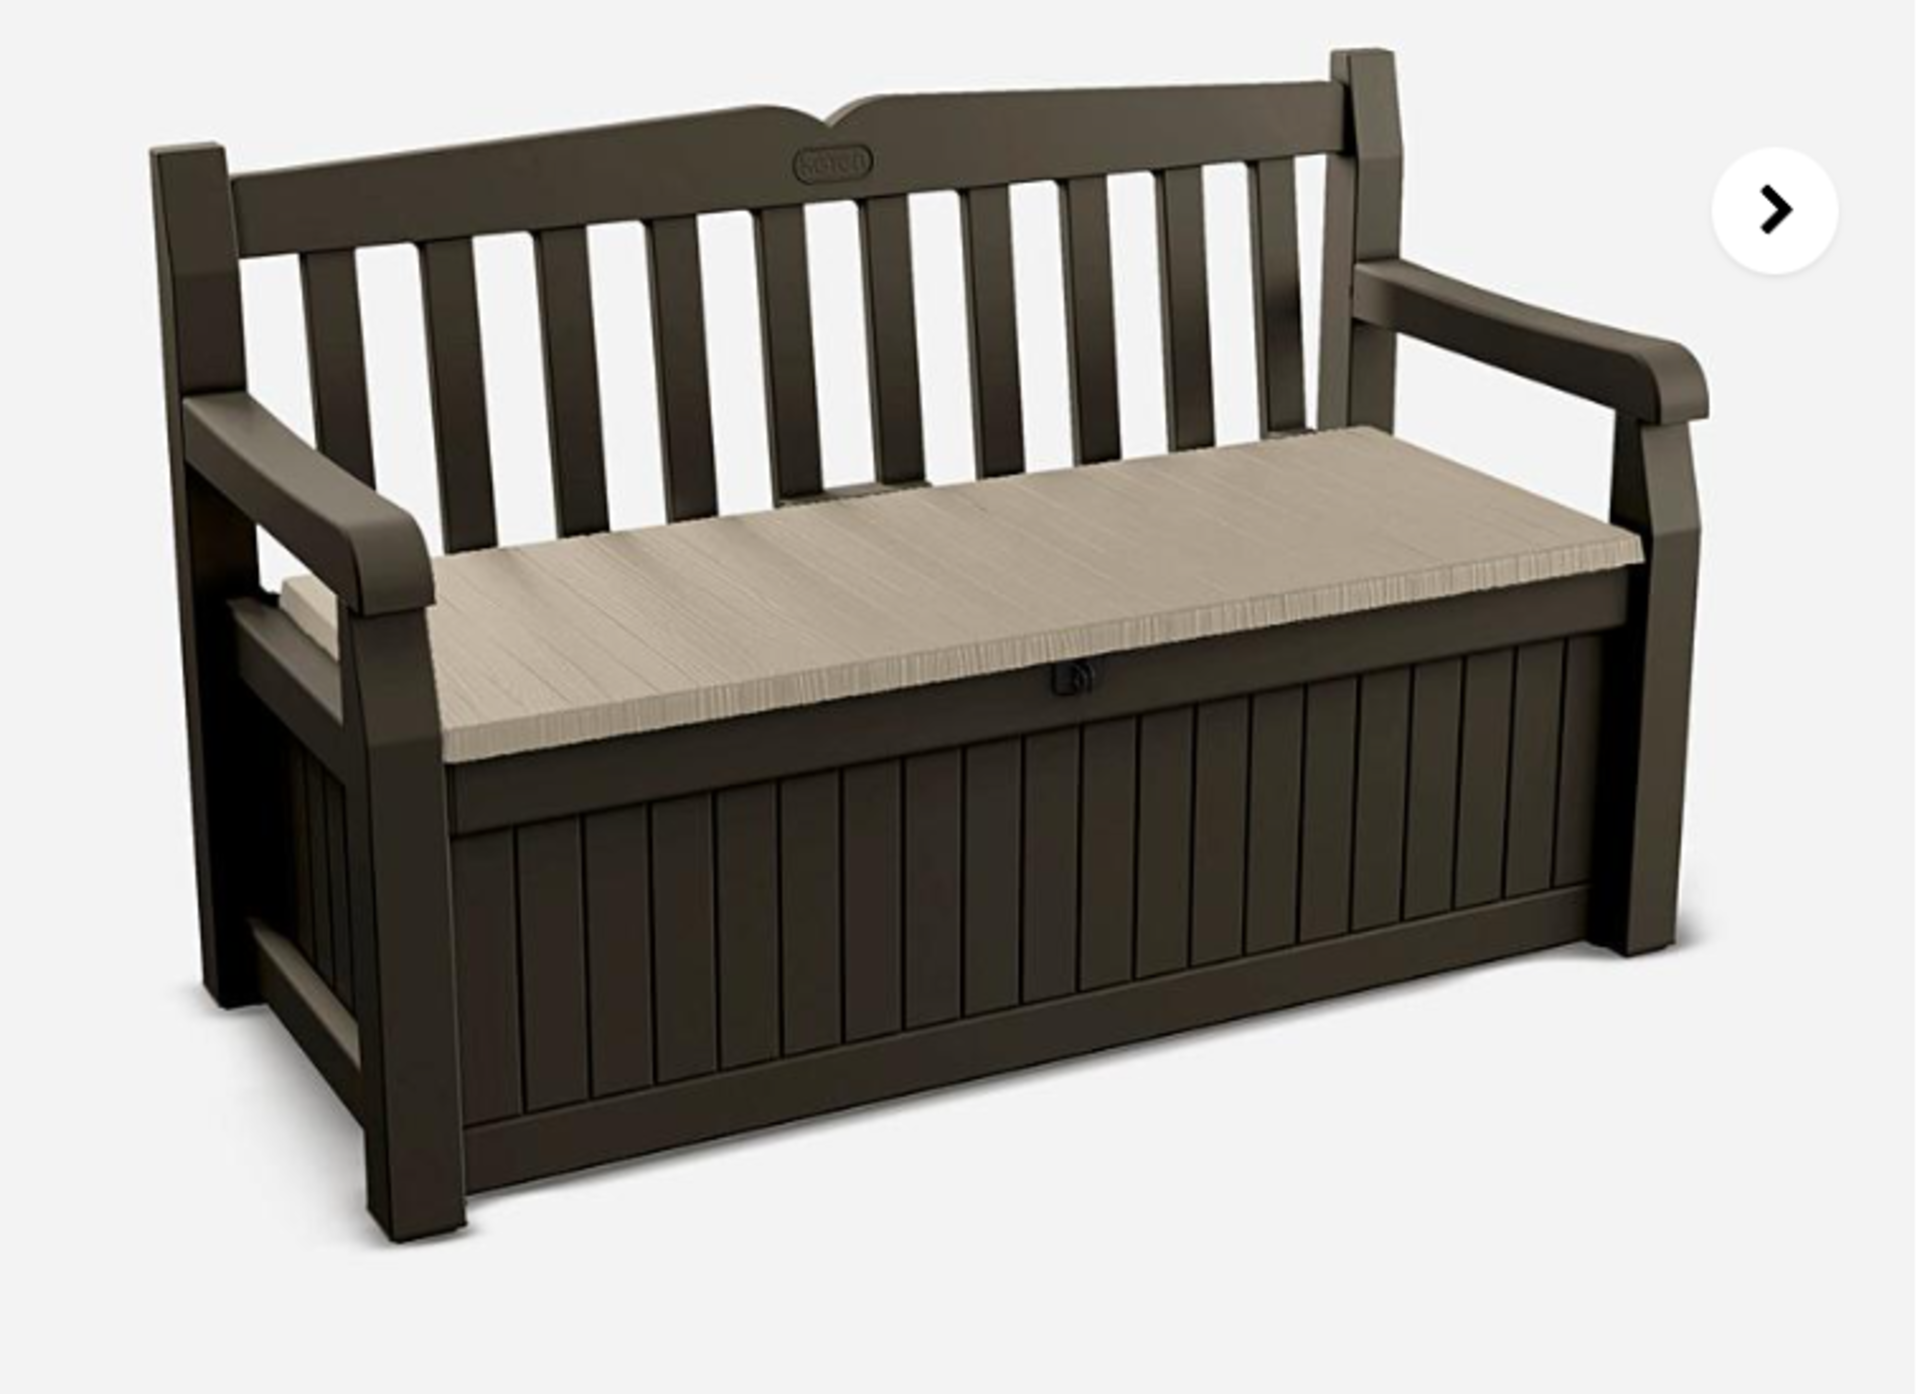 Keter Eden Storage Bench. - ER20. RRP £199.99. You can never have too much outdoor storage or too